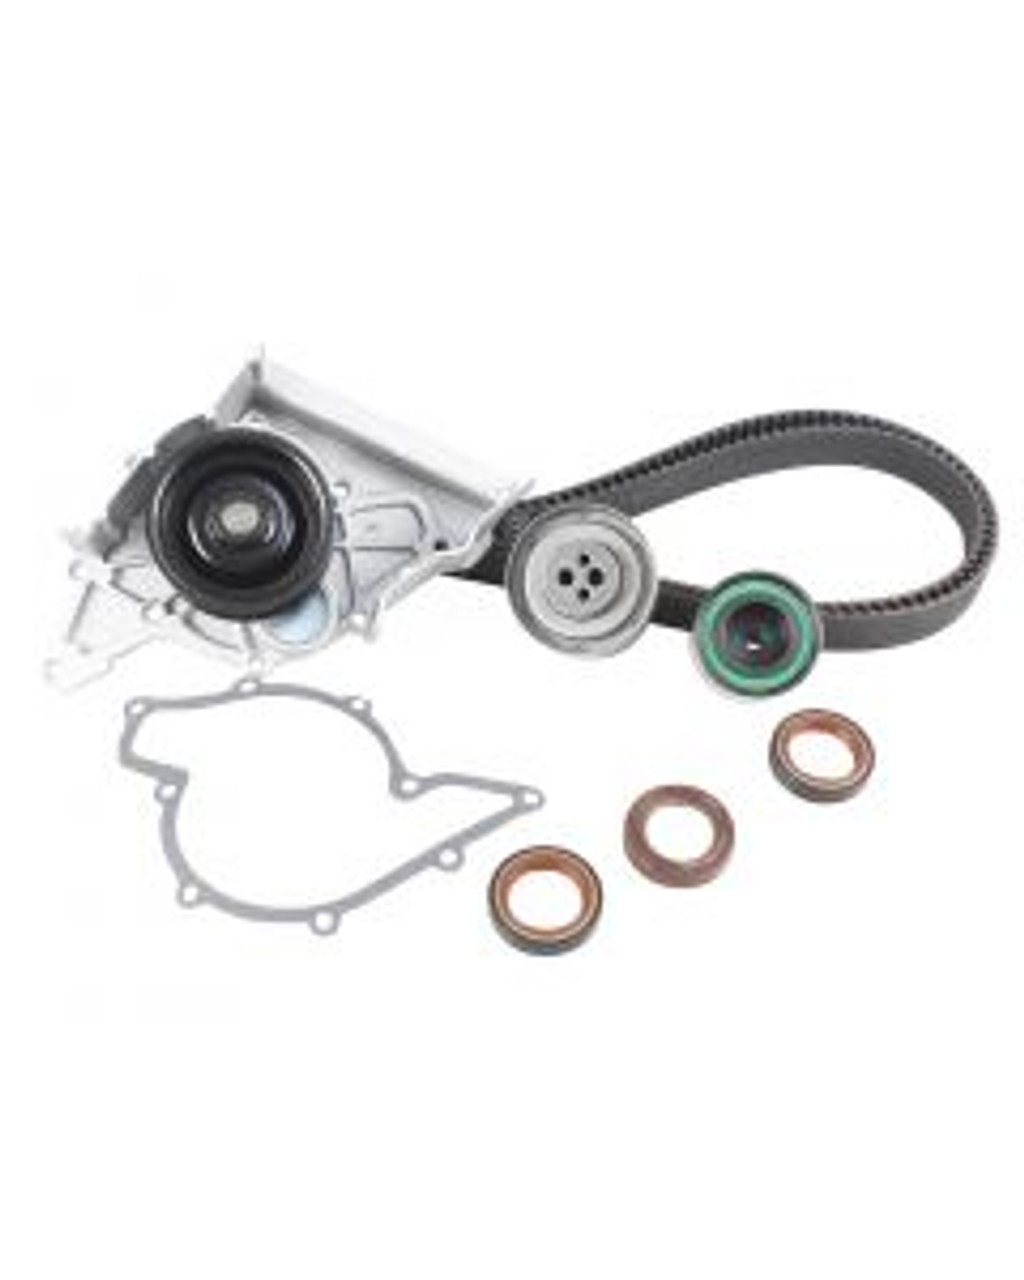 Timing Belt Kit with Water Pump 2.8L 1994 Audi 90 - TBK806WP.10